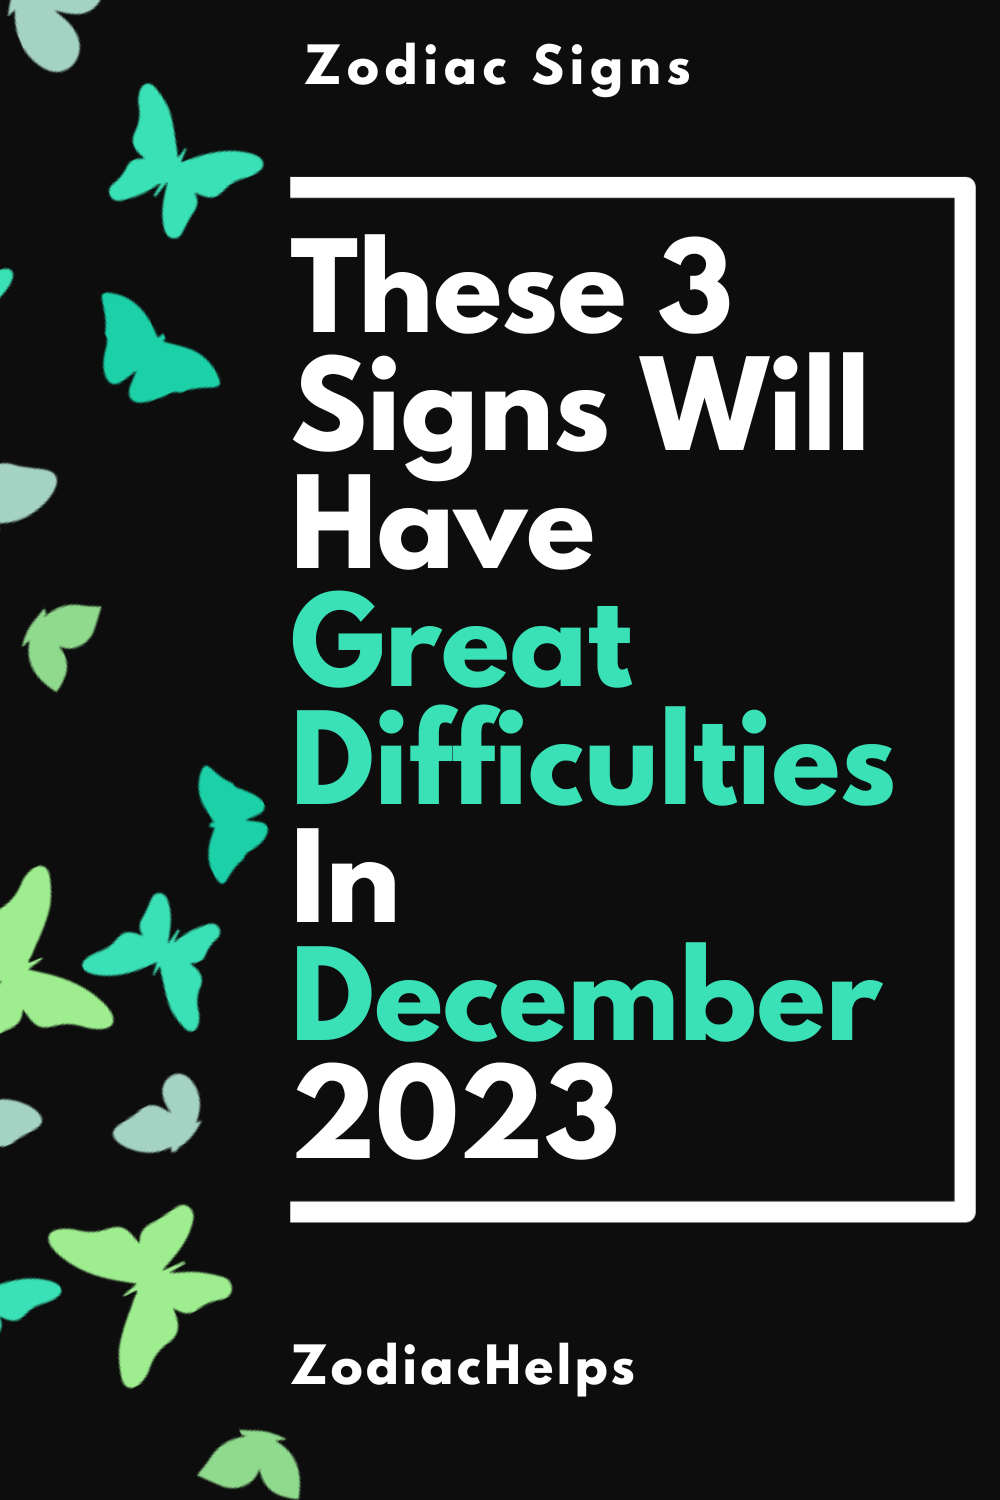 These 3 Signs Will Have Great Difficulties In December 2023